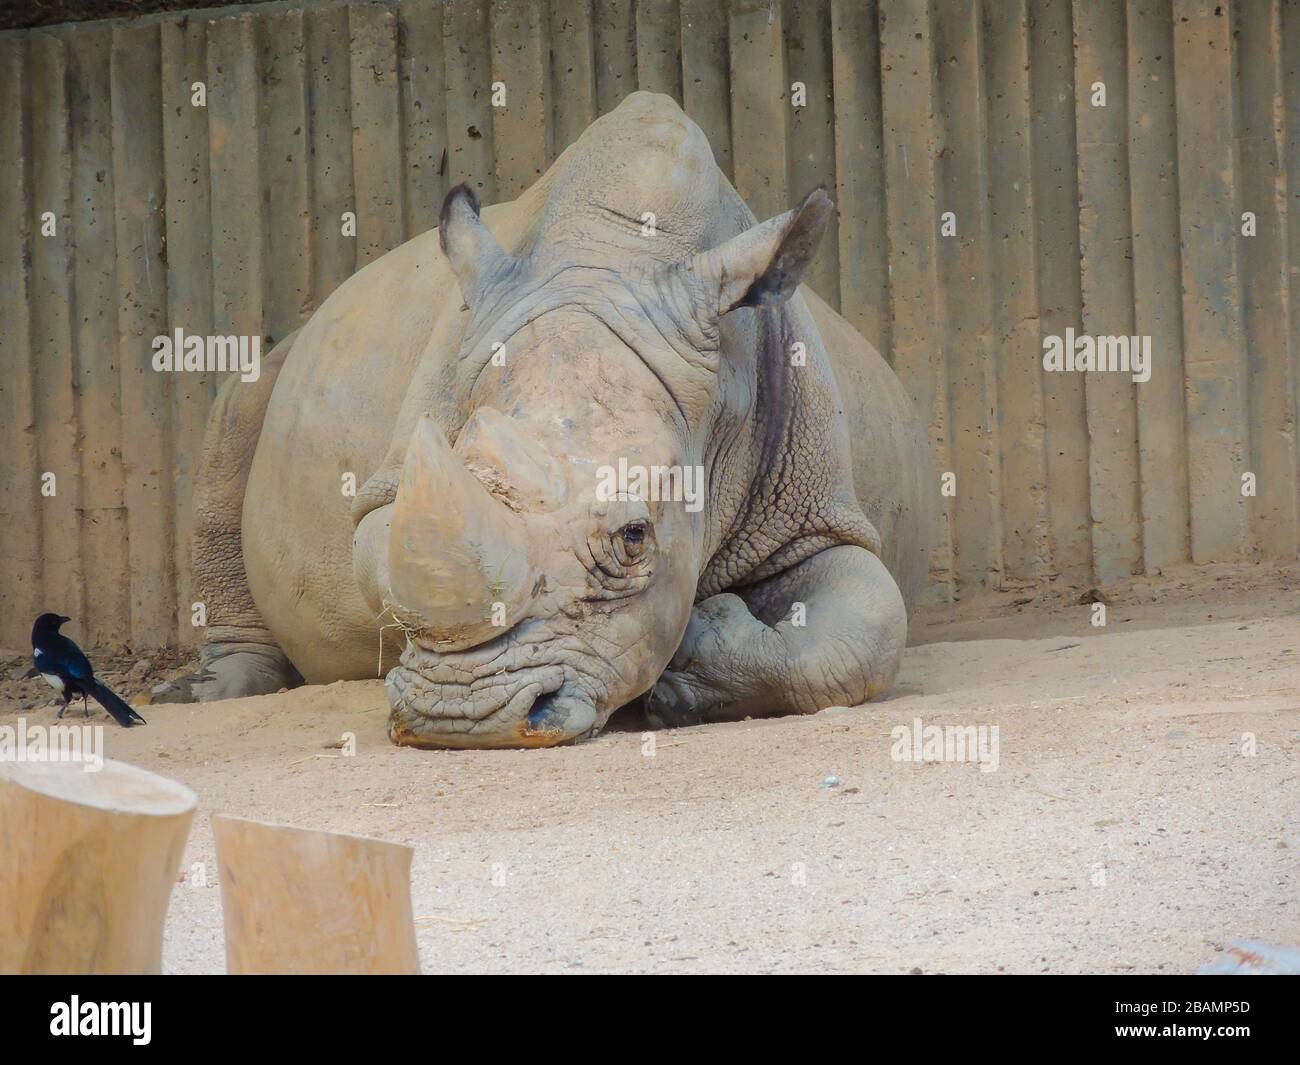 Sad animals deprived of their freedom in a zoo Stock Photo - Alamy